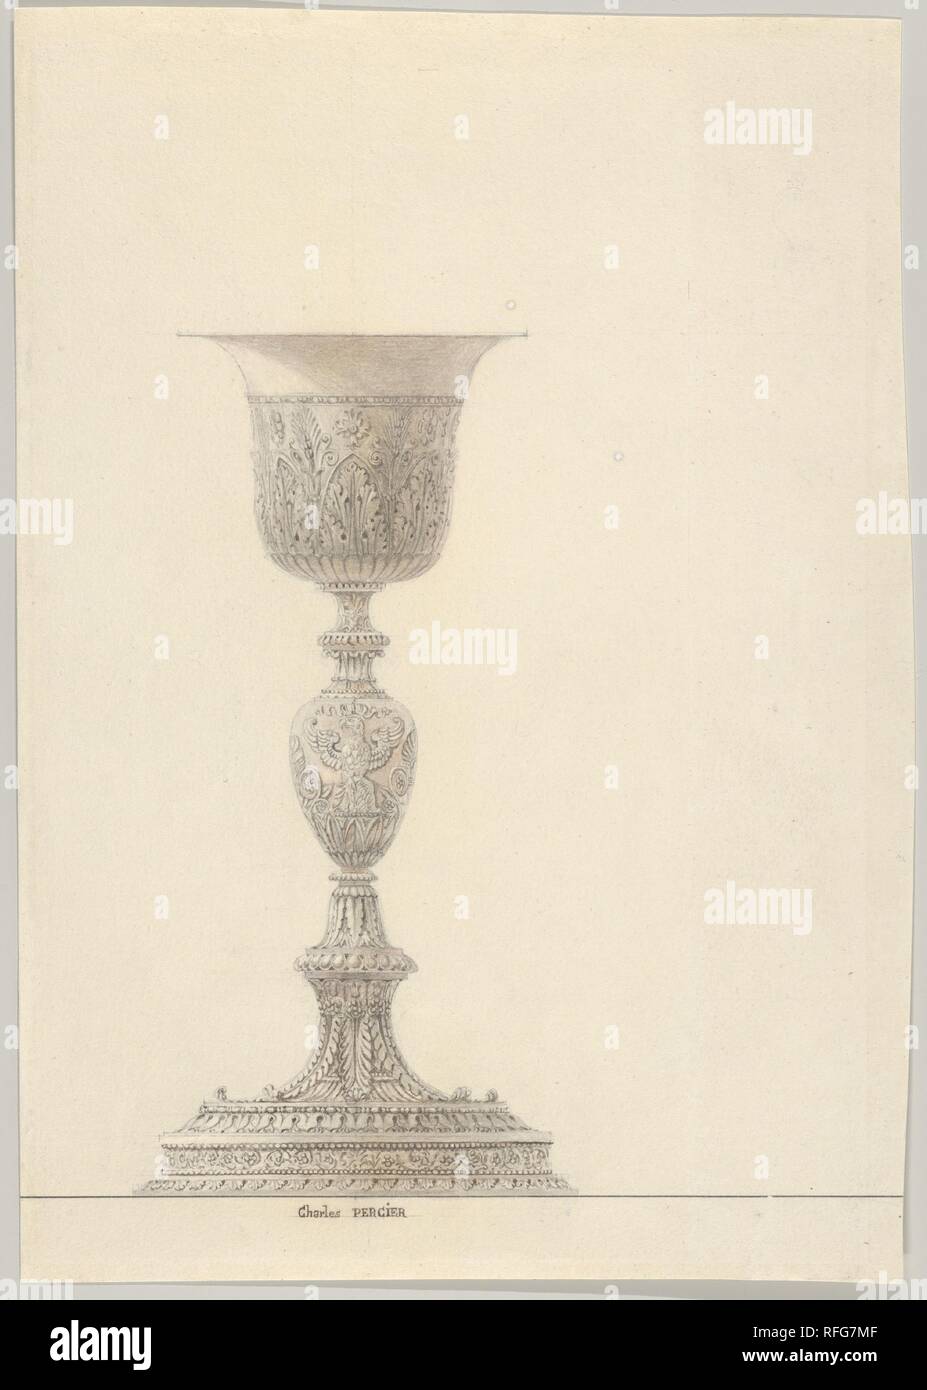 Chalice for the Coronation of Napoleon I. Artist: Charles Percier (French, Paris 1764-1838 Paris). Dimensions: Sheet: 10 1/2 × 7 5/16 in. (26.7 × 18.6 cm). Date: 1804.  Chalice from a set of two design drawings for a communion service consisting of a ciborium and a cup. The foot and base of the two designs are the identical in their structure and decoration. The metal work is covered all over with decorations typical for the Empire period. Characteristic is the Imperial eagle which is depicted between palmettes on the node. The cuppa of the chalice is decorated by one wide frieze, with a patte Stock Photo